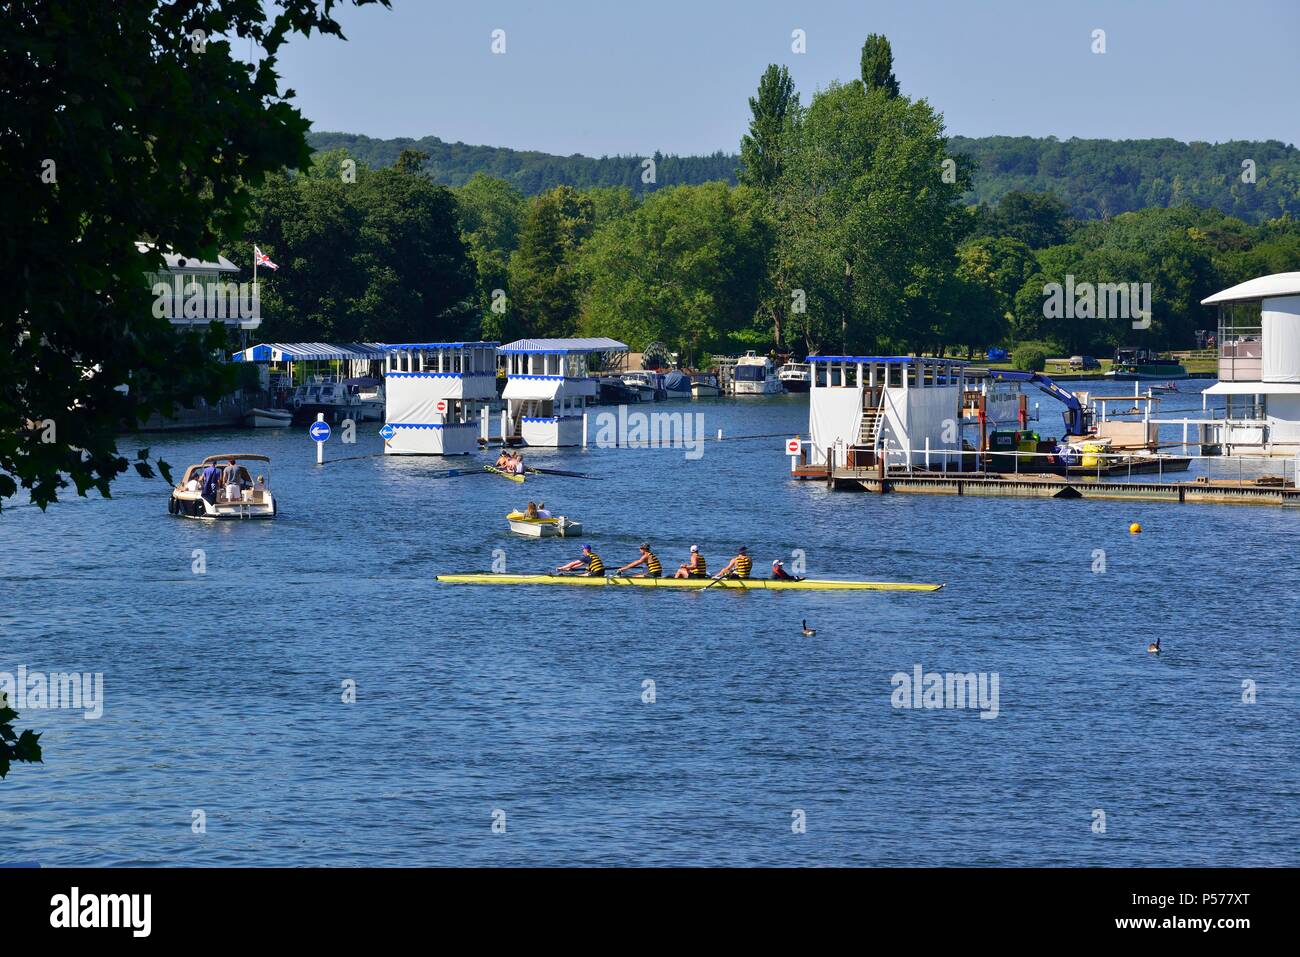 Crews  practicing for the forthcoming Henley Royal Regatta starting 4th — 8th July, for  the third most important event in the English social sporting calendar. Stock Photo